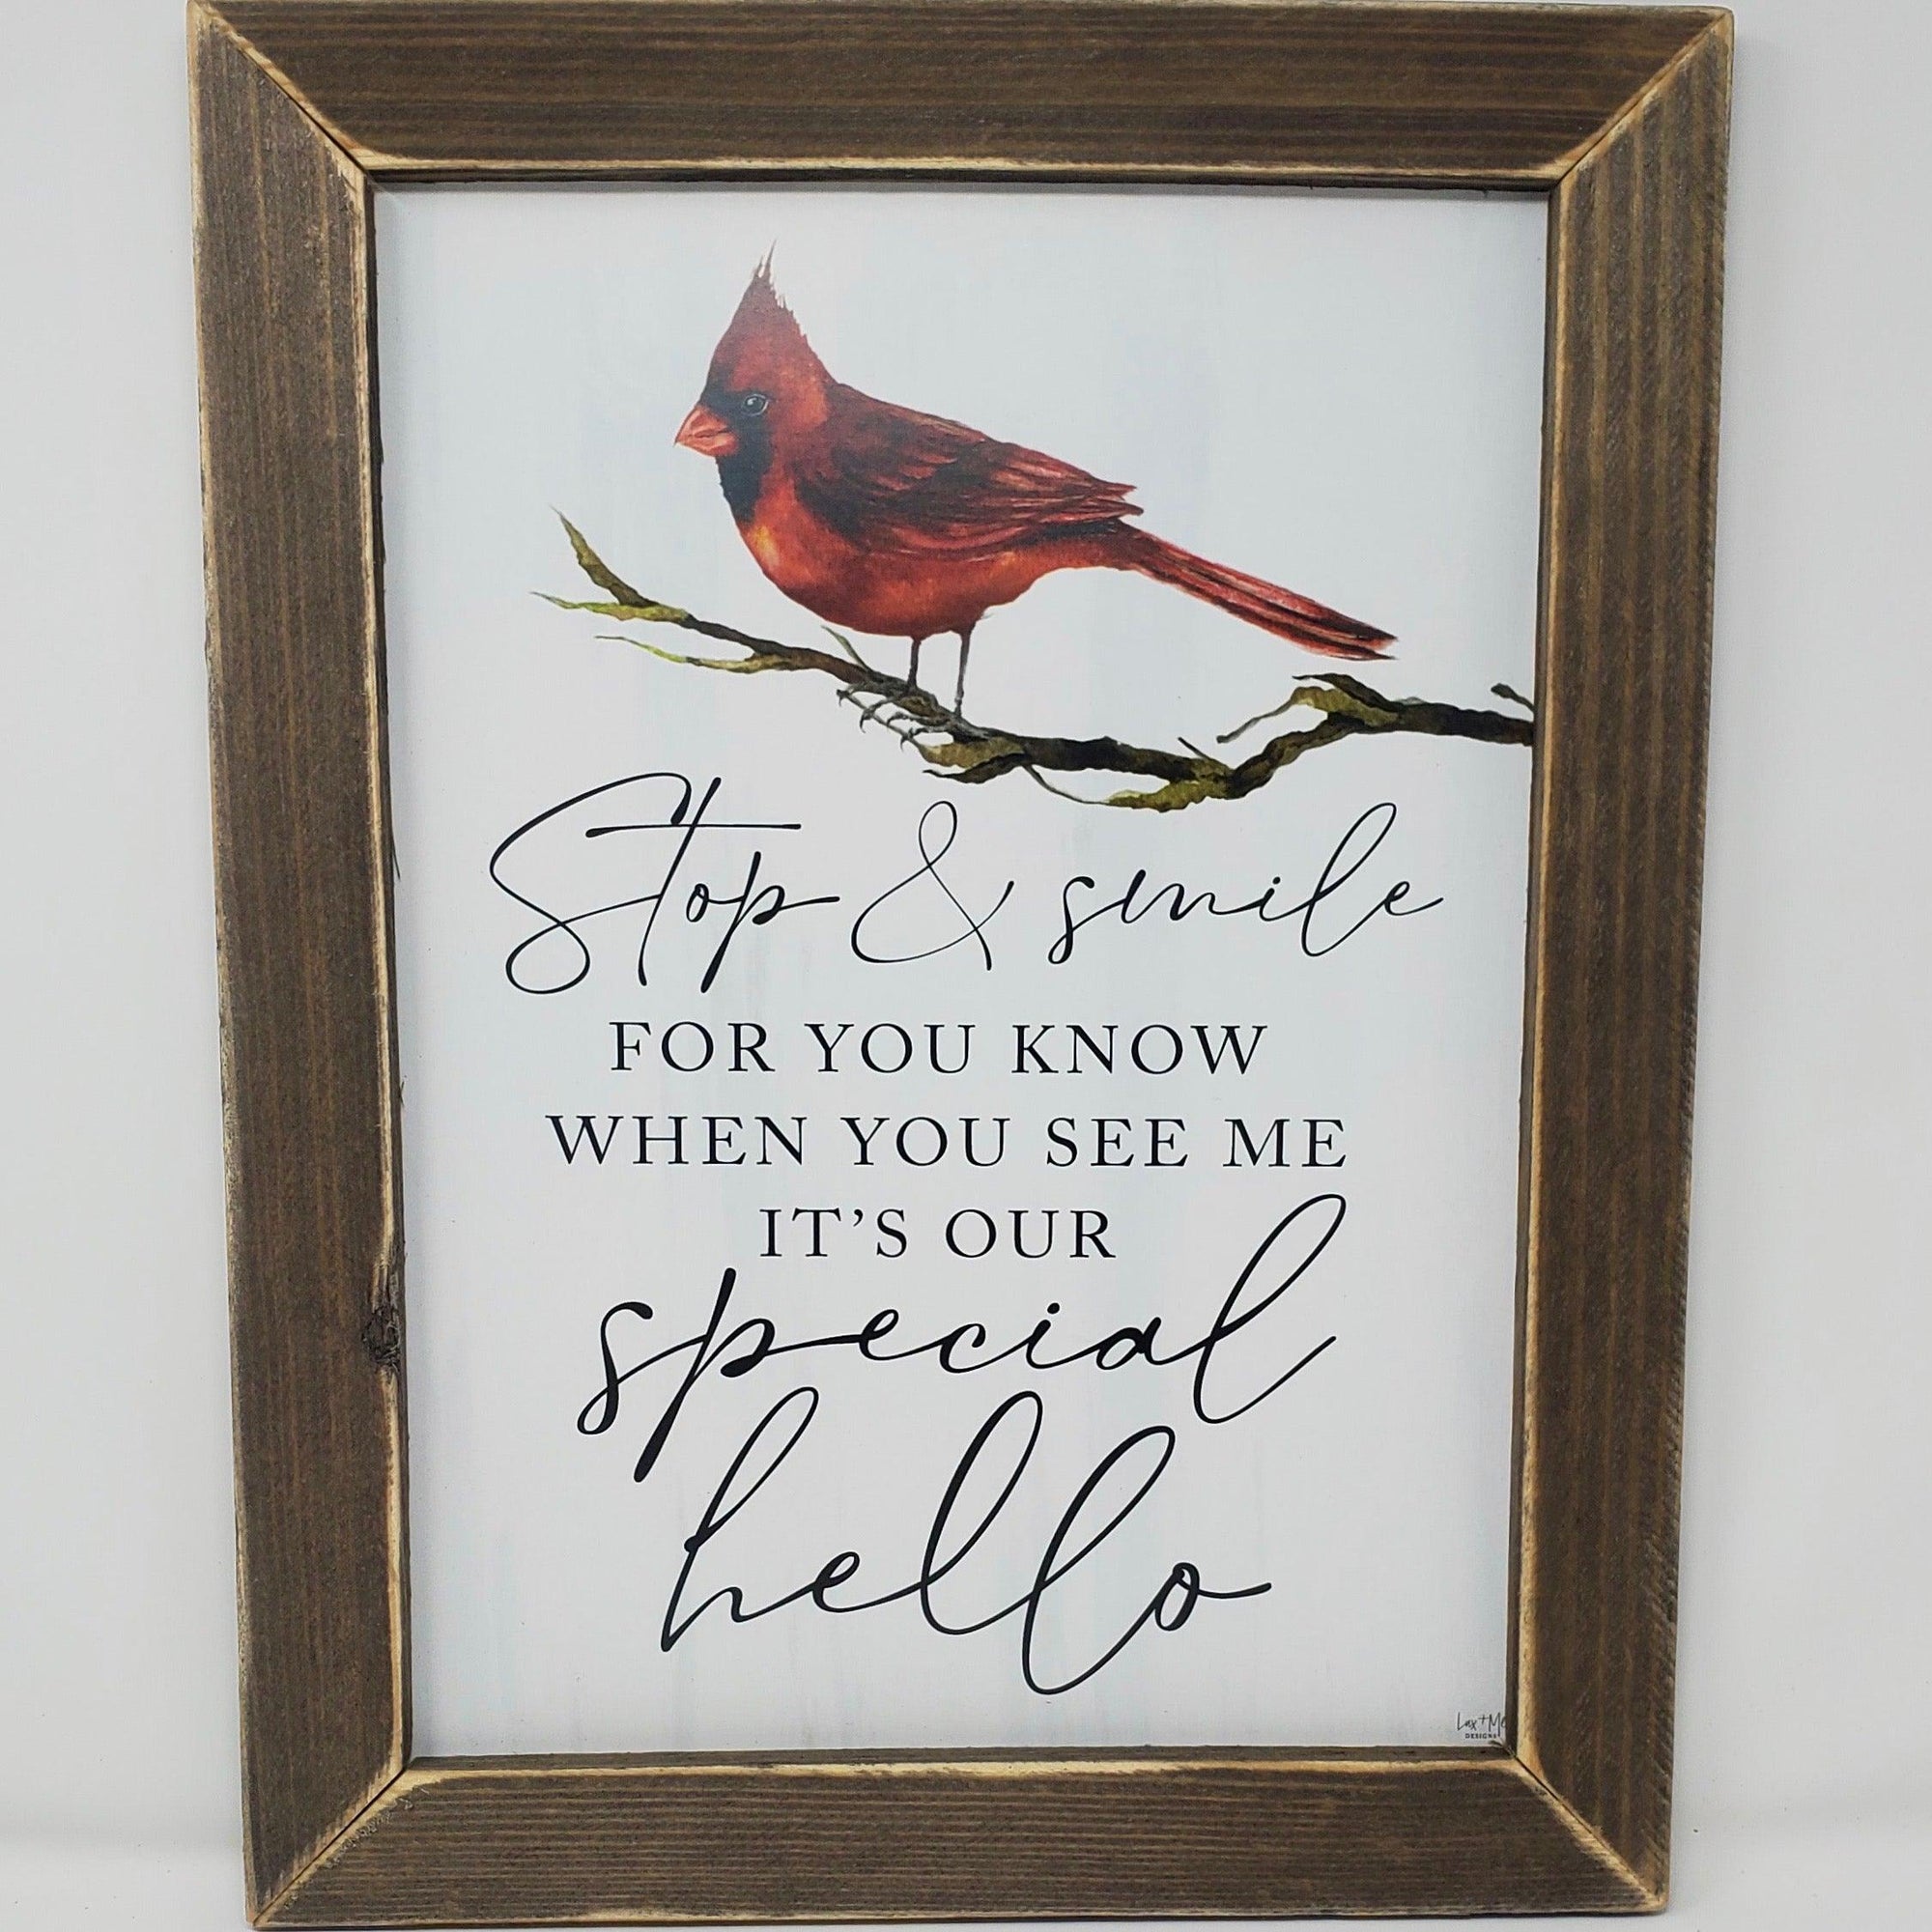 Red Cardinal Special Hello Print - A Rustic Feeling